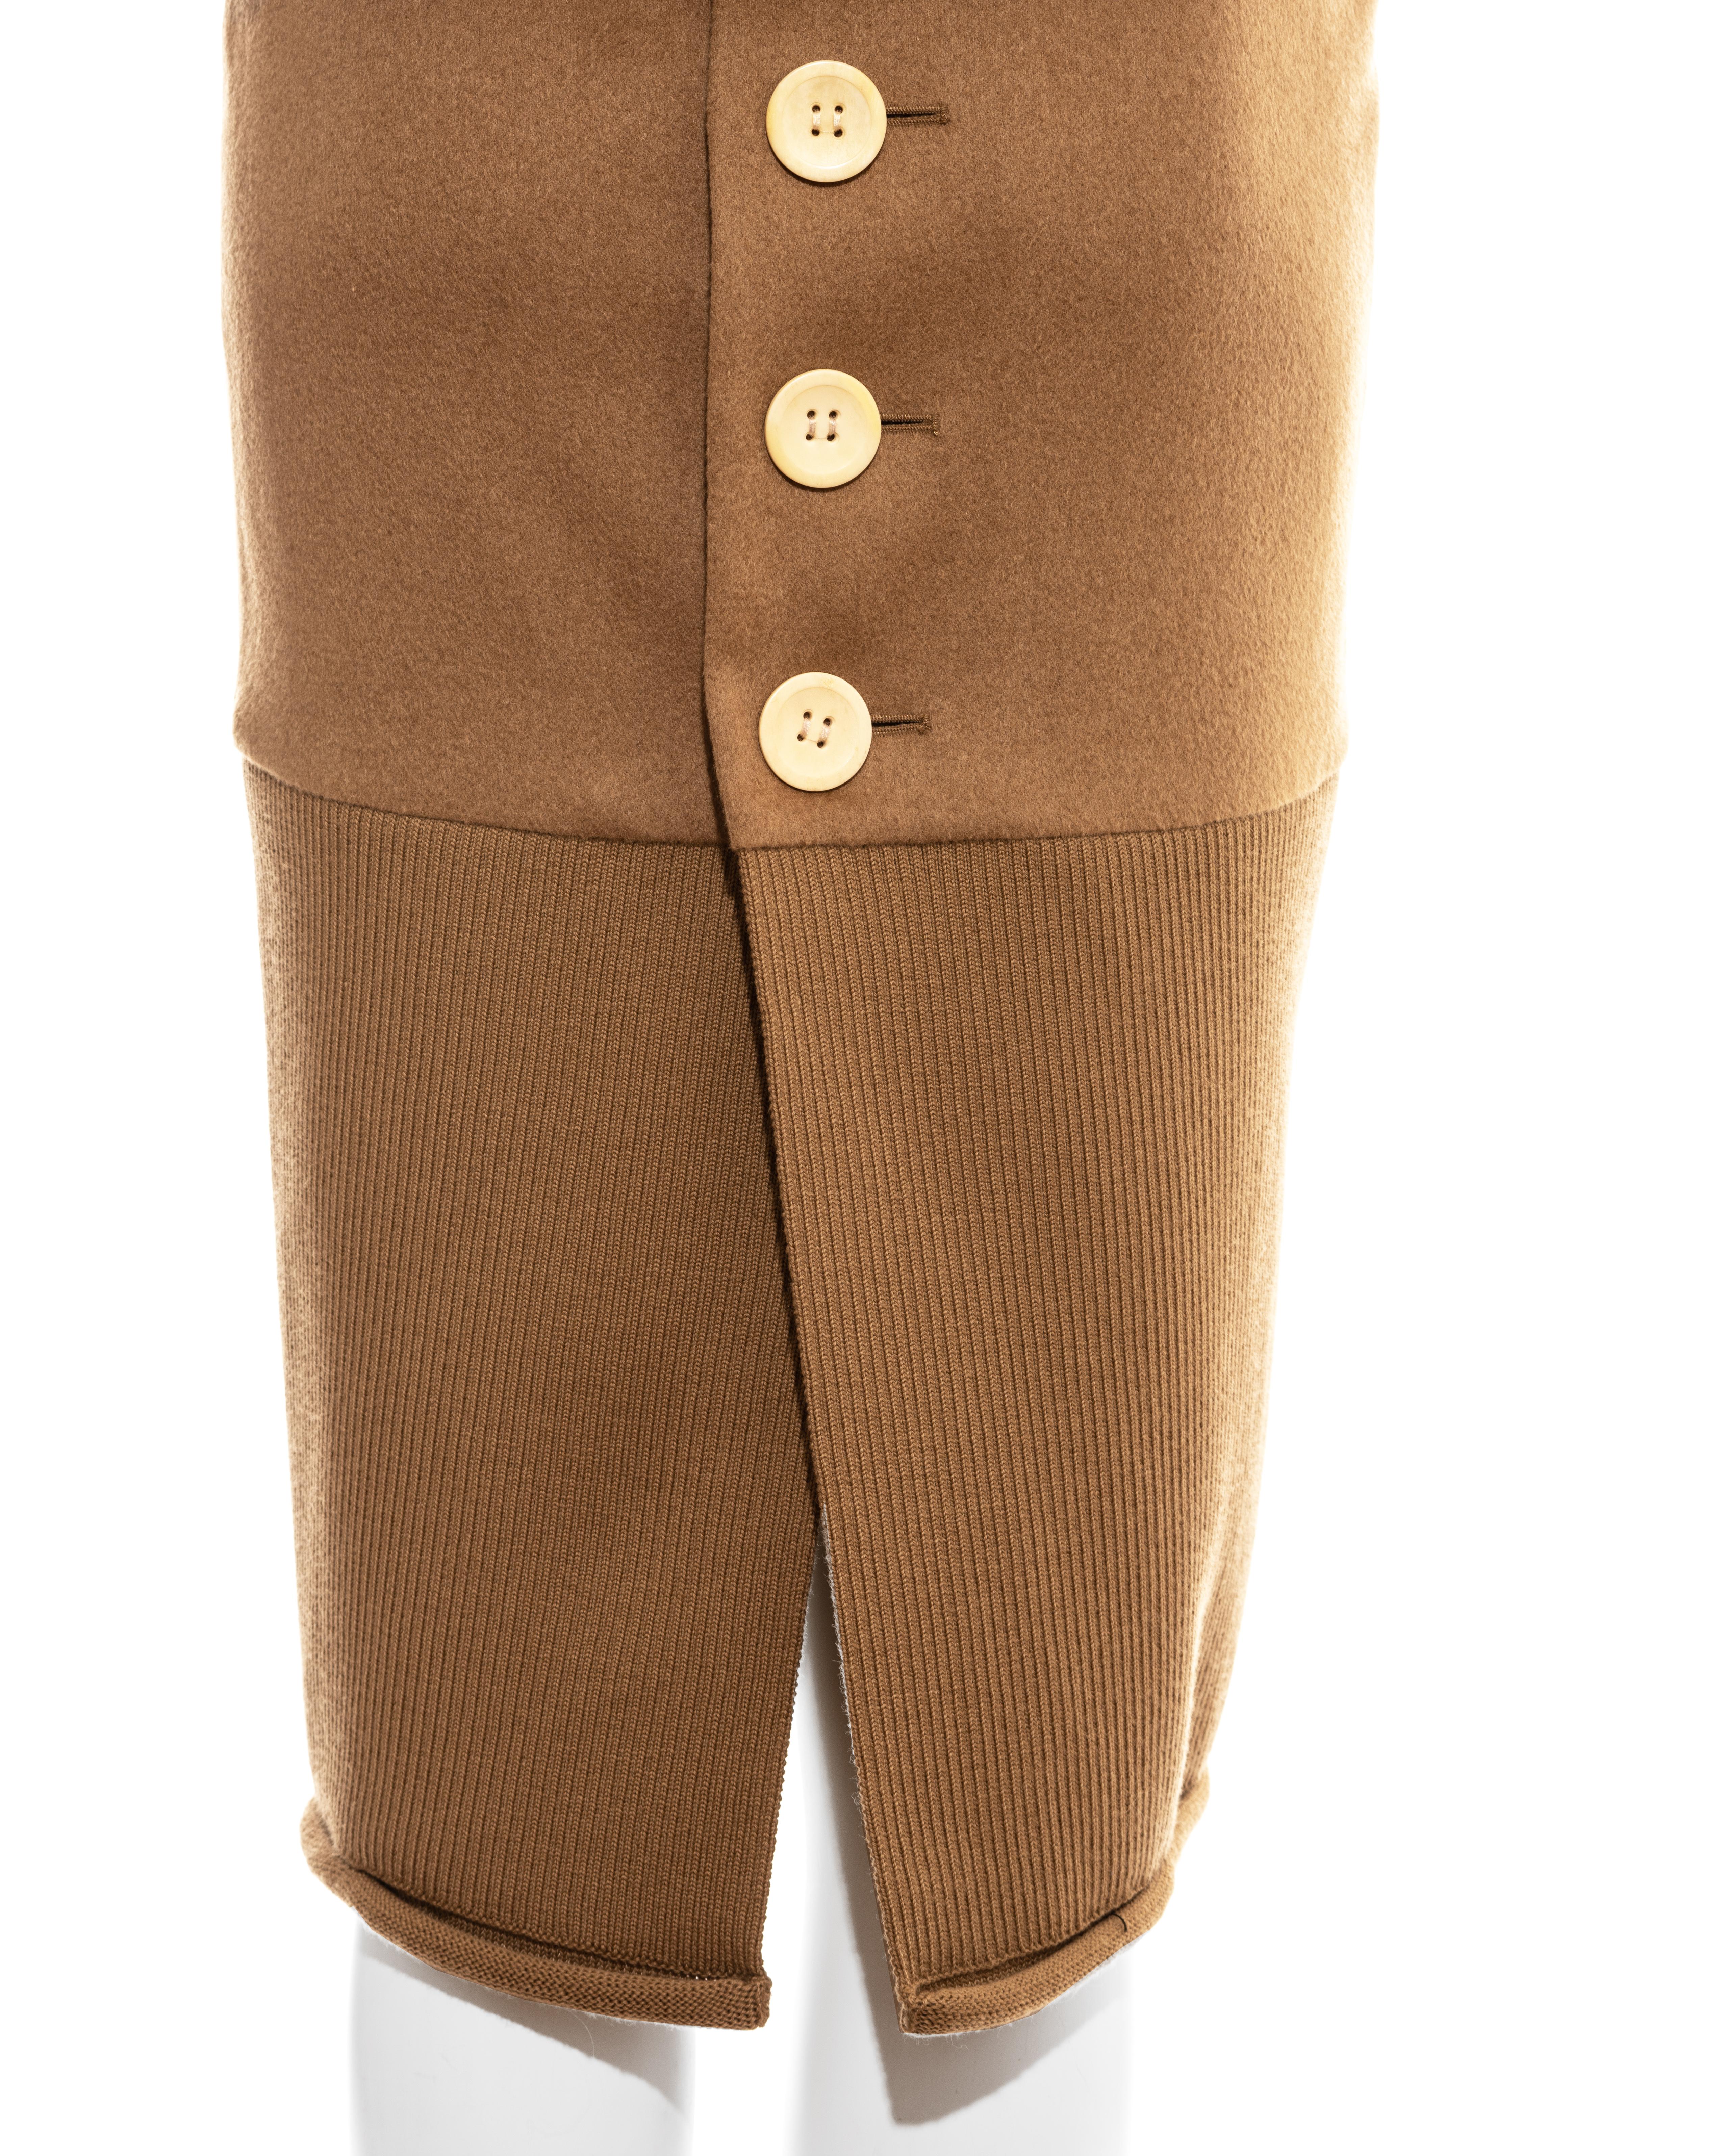 Christian Dior by John Galliano camel wool skirt suit, fw 1999 For Sale 2